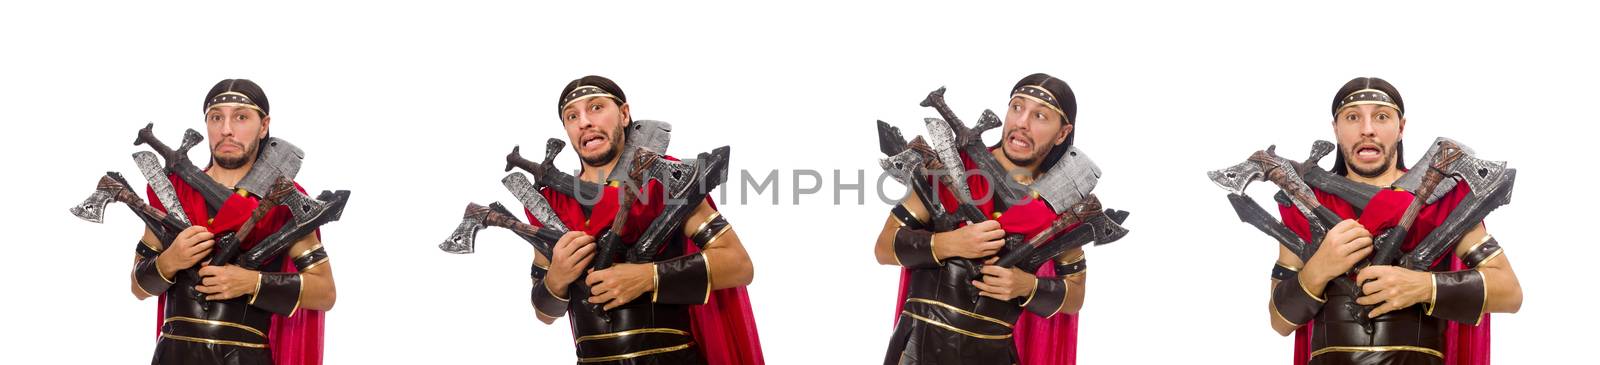 Gladiator with armament isolated on white